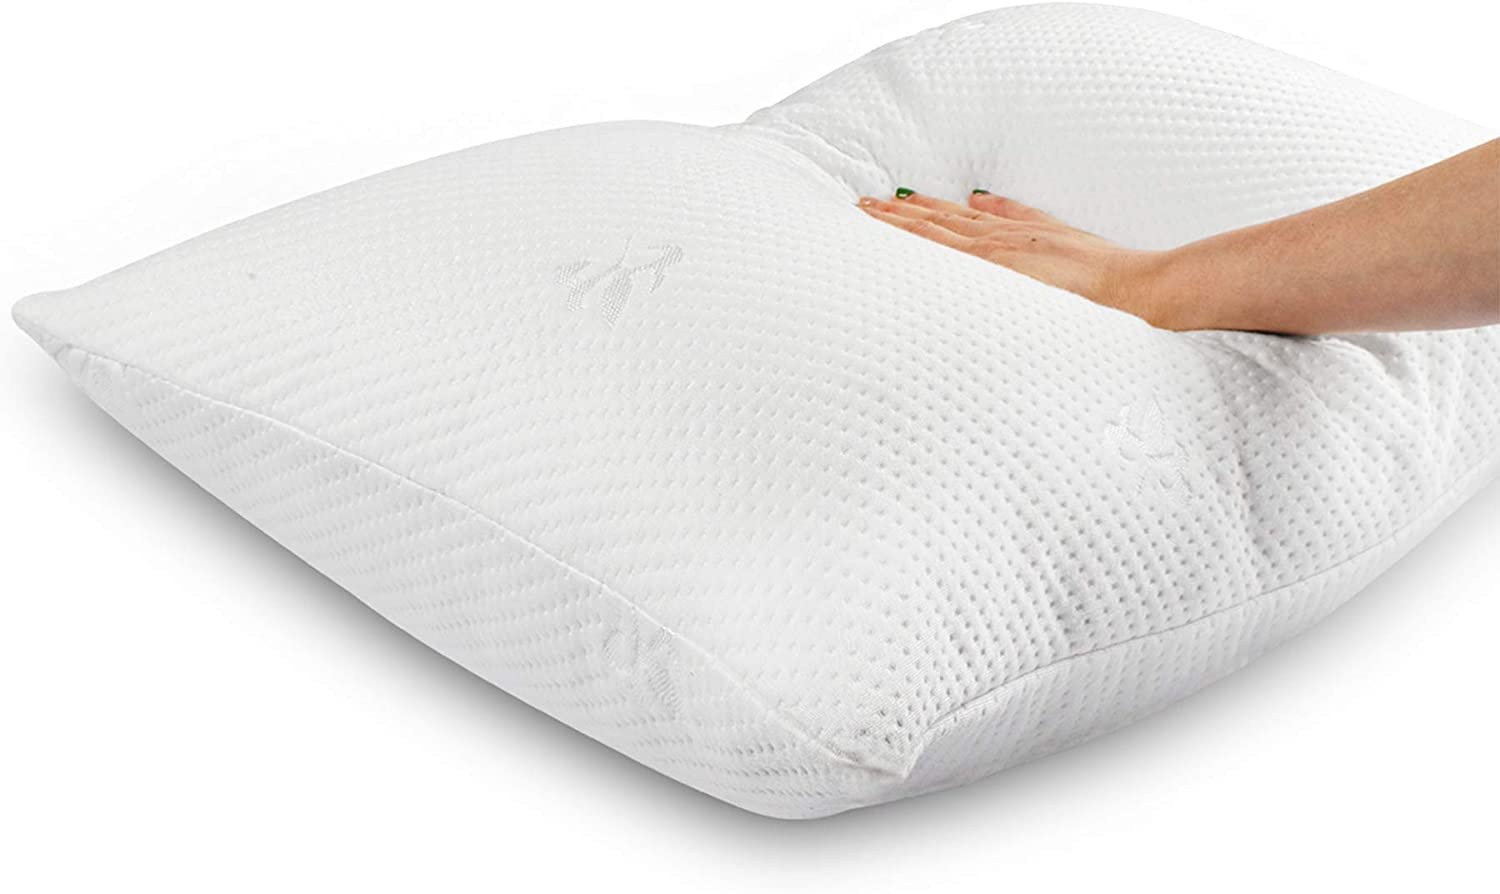 Memory foam pillows can retain their shape for a long time.